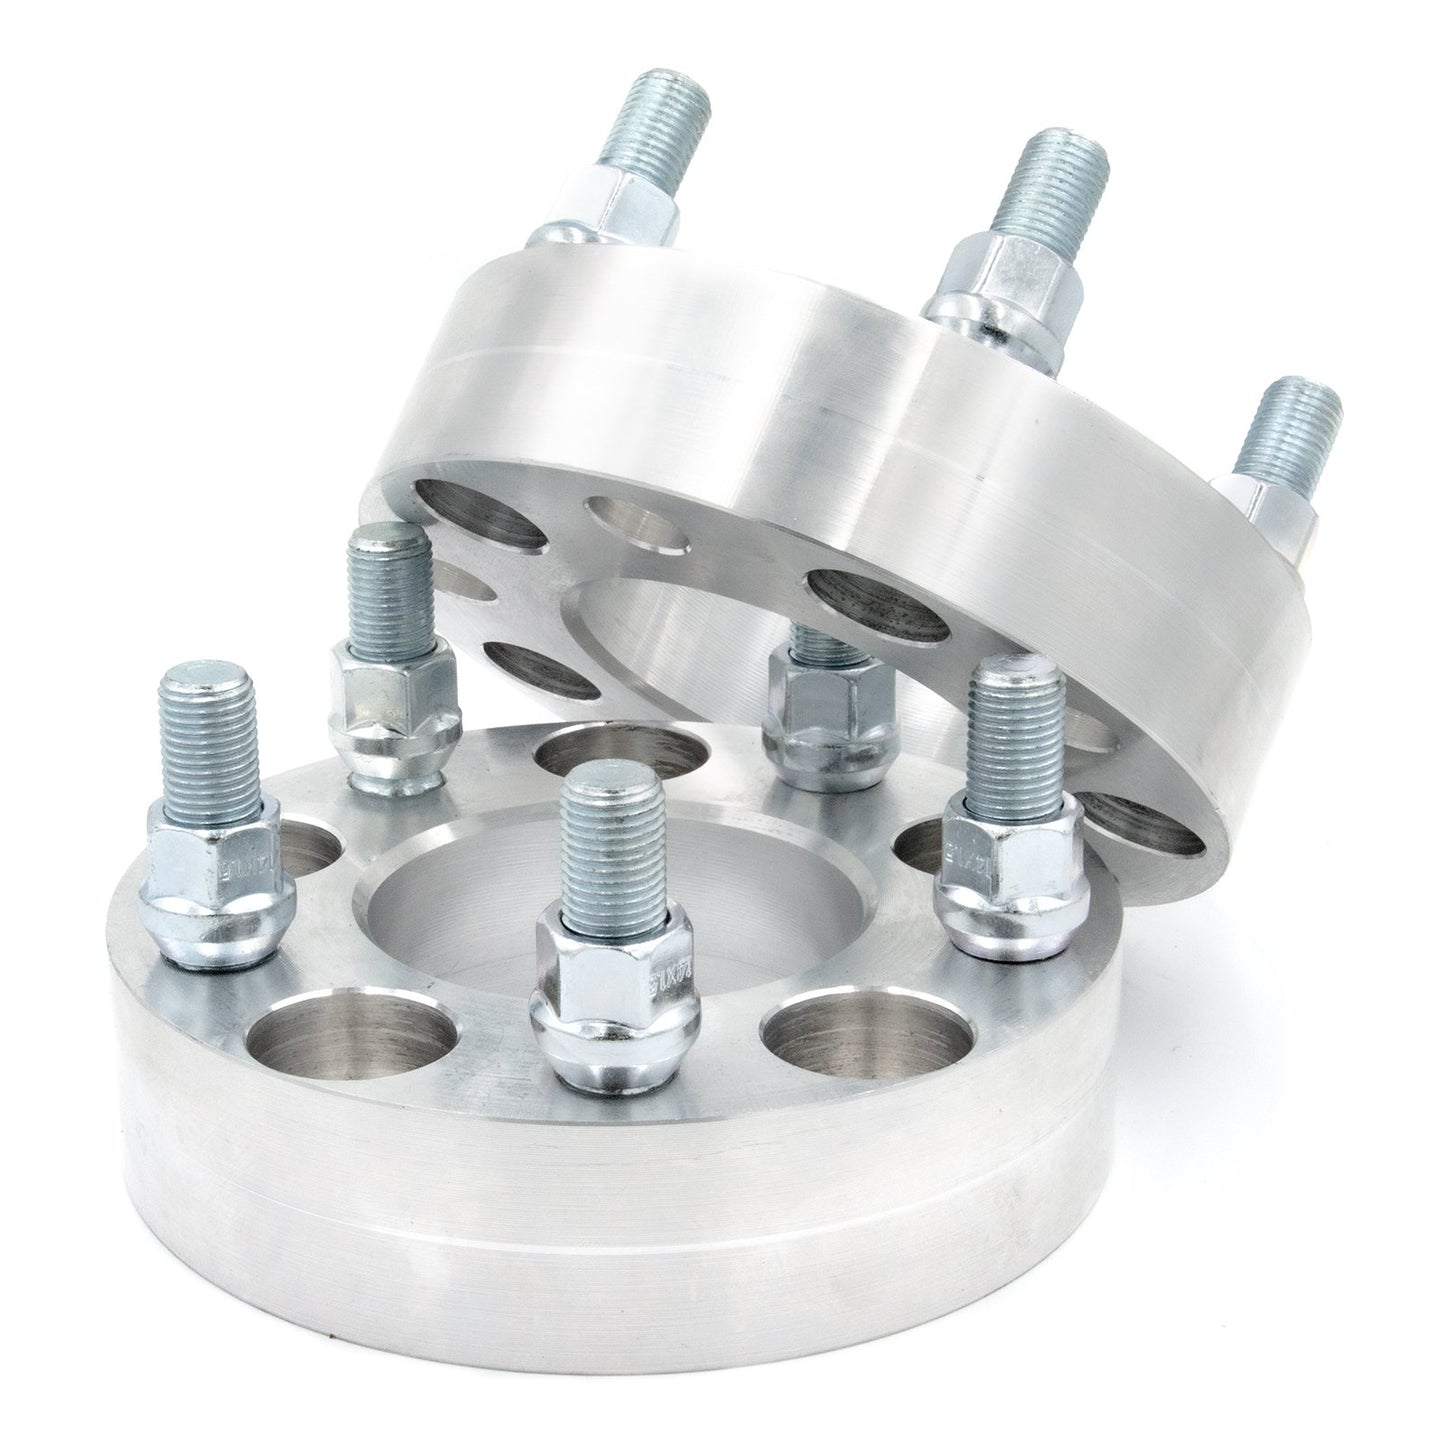 5x130 to 5x100 Wheel Spacer/Adapter - Thickness: 3/4"- 4"